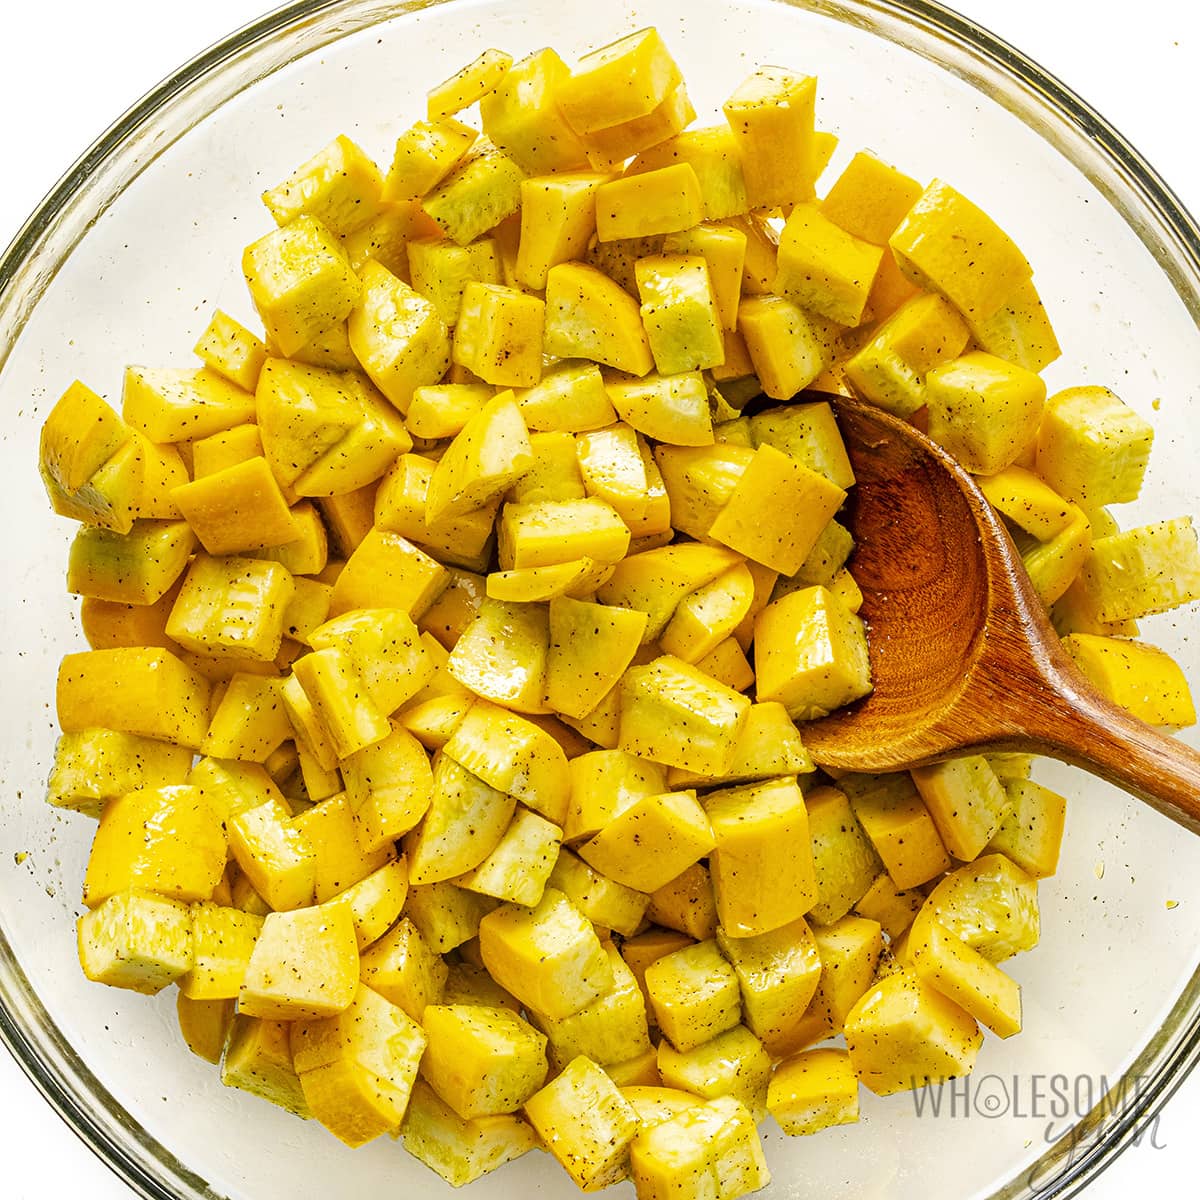 Seasoned squash cubes in a bowl with a wooden spoon.